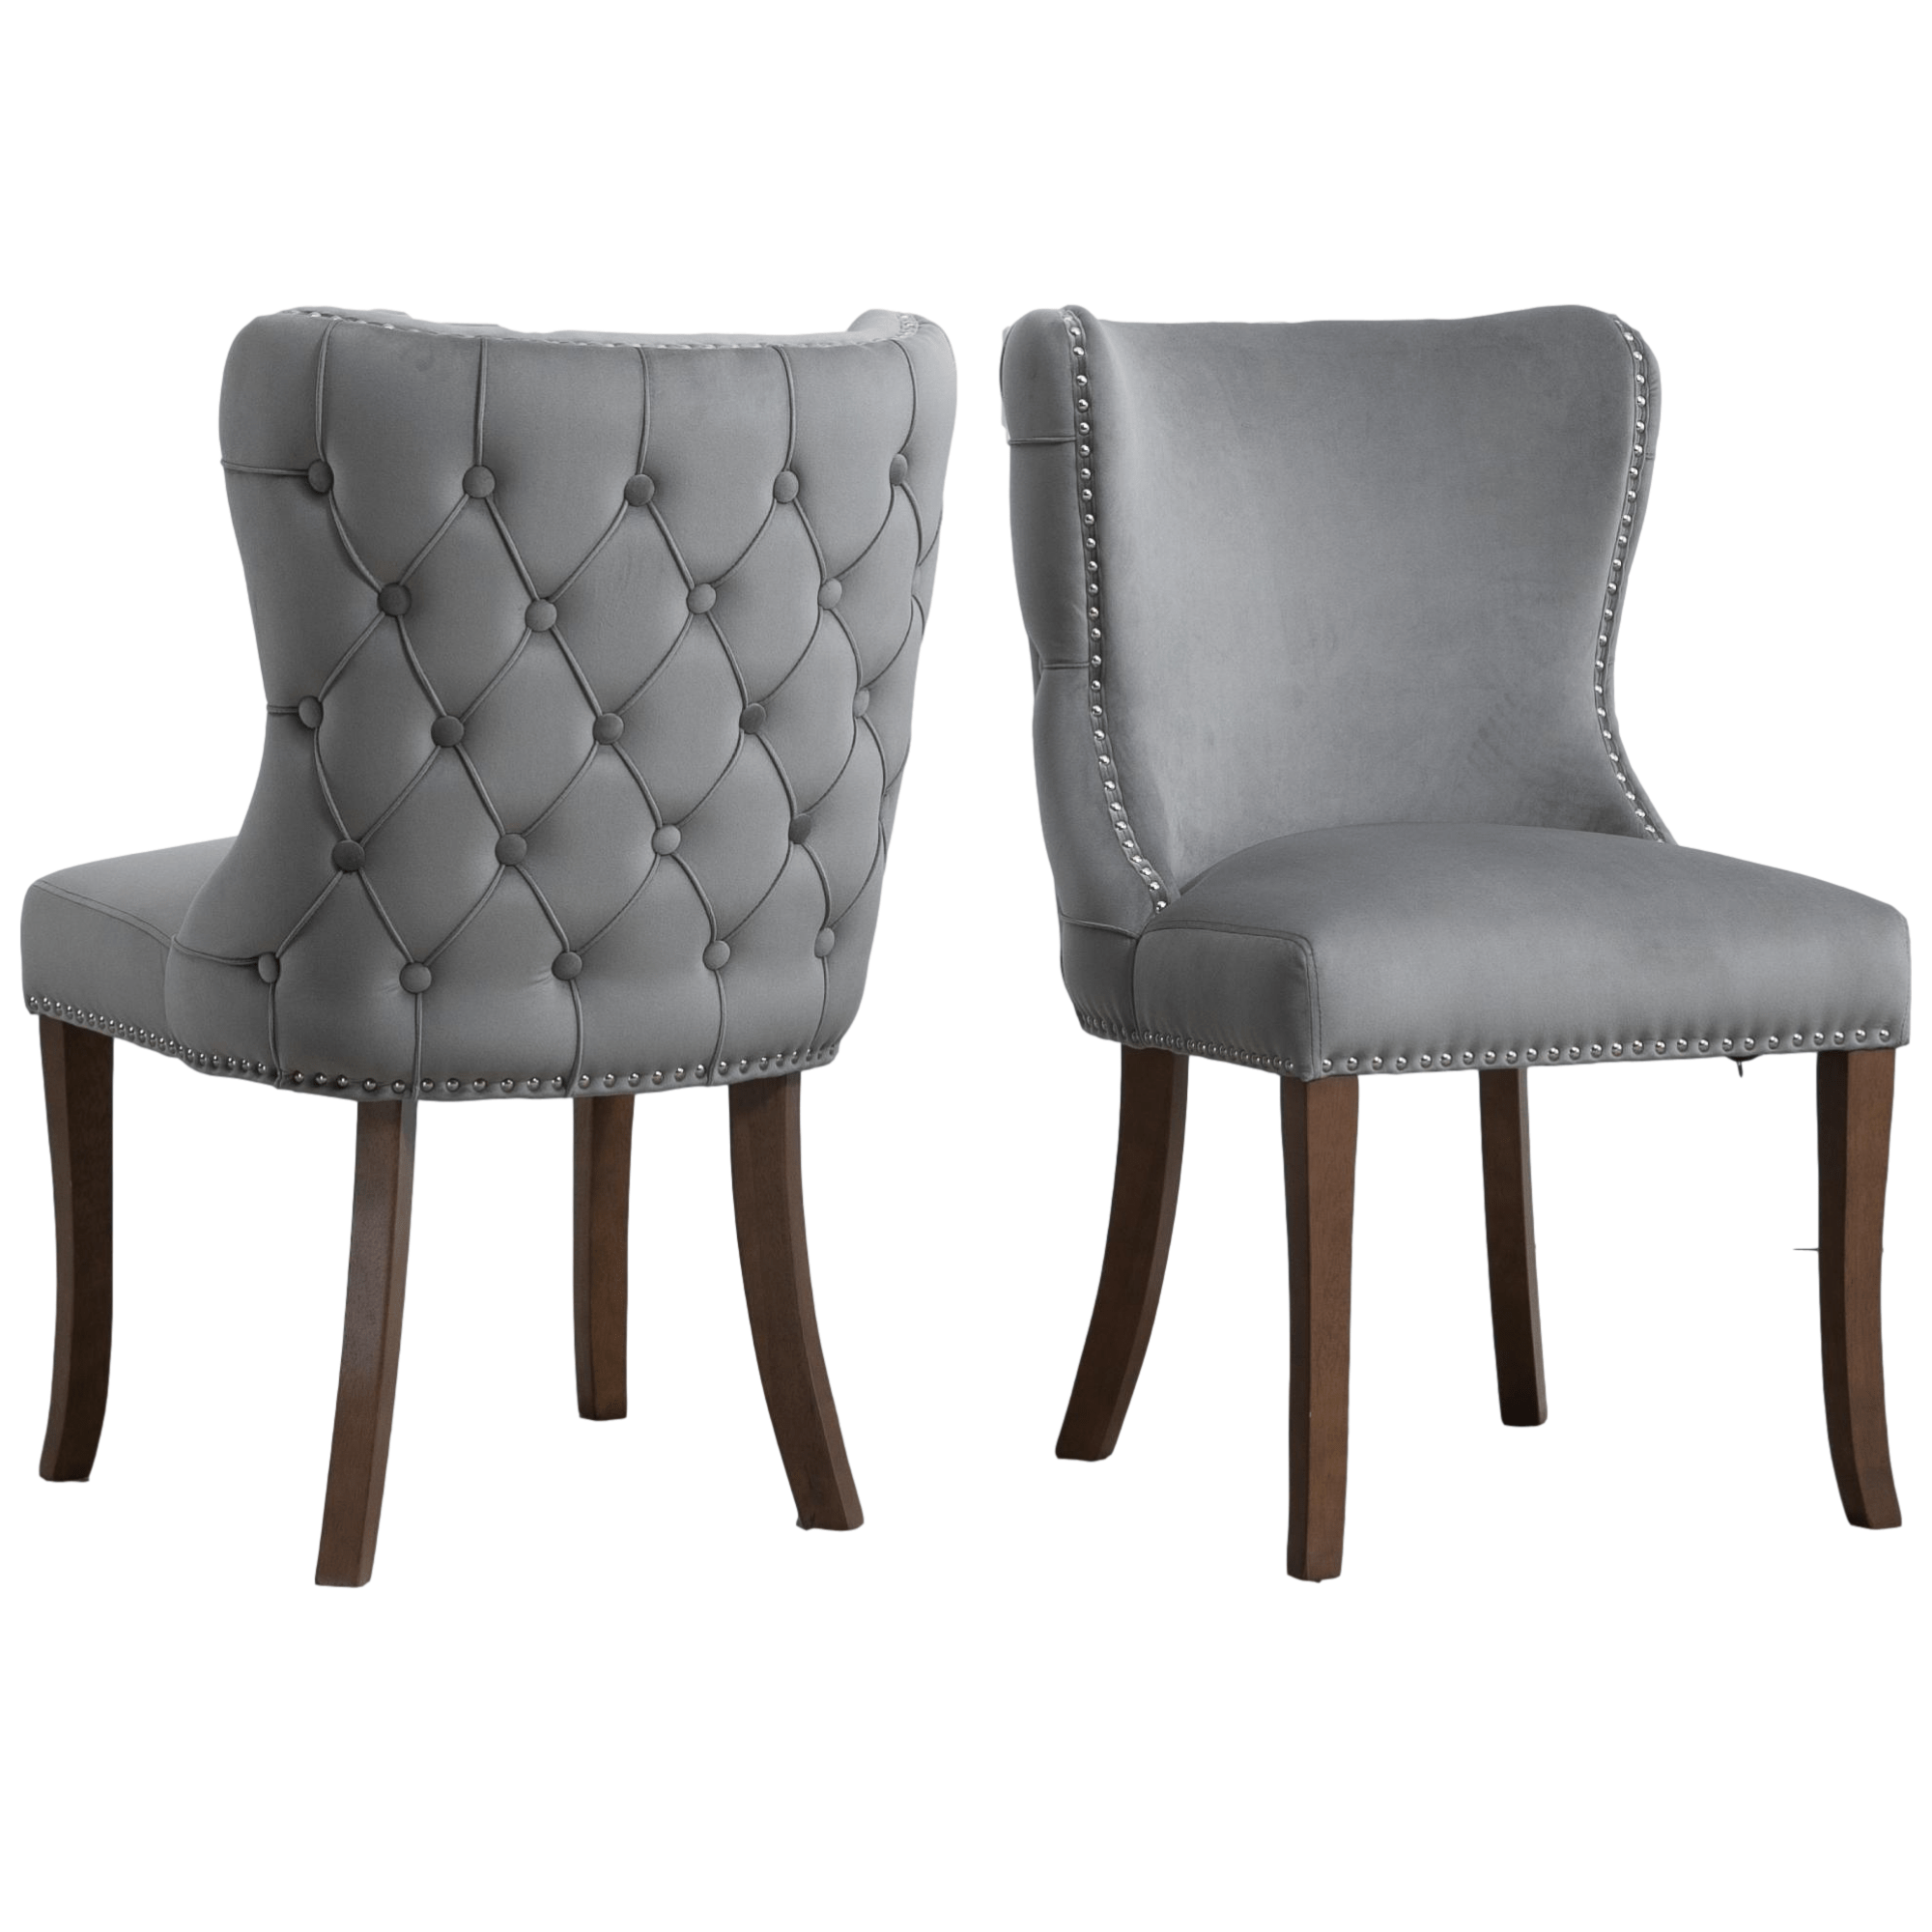 2 PCS Upholstered Wing-Back Dining Chair with Back-stitching Nail-head Trim and Solid Wood Legs-CASAINC